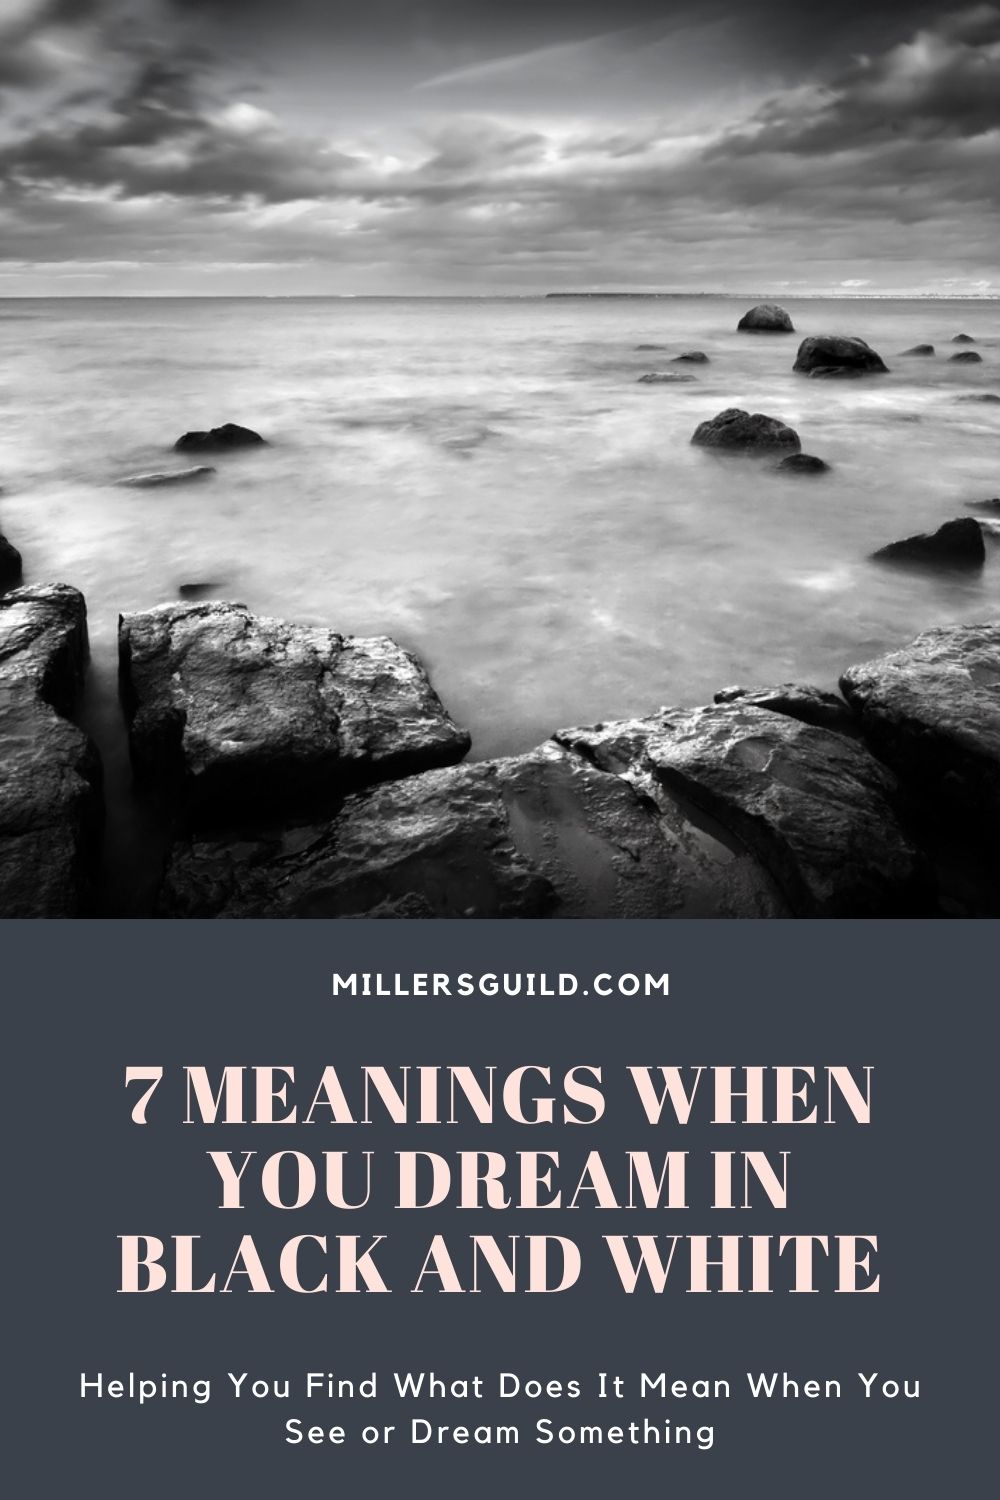 7 Meanings When You Dream in Black and White 2